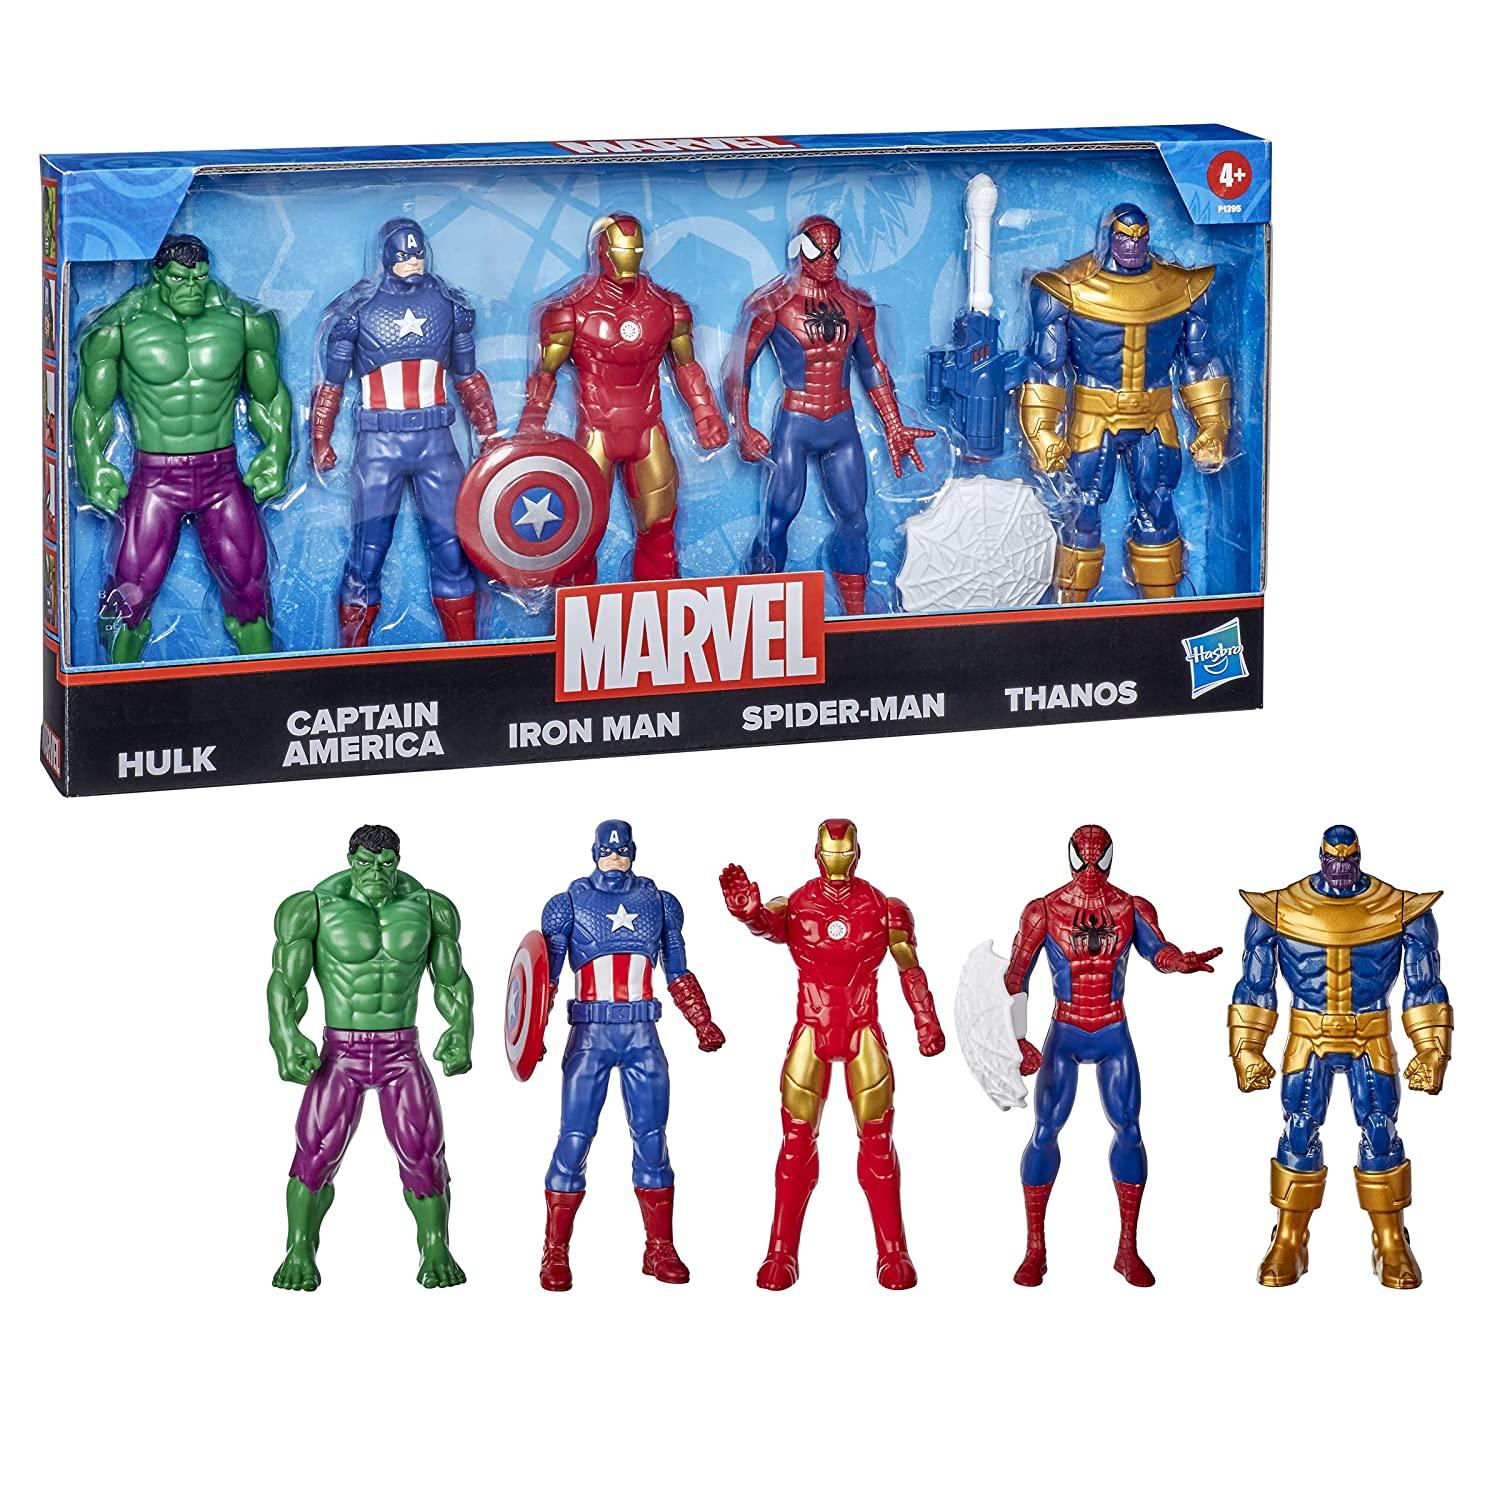 Marvel 6 Inch Super Heroes Iron Man, Spider-Man, Captain America, Hulk, Thanos Action Figure, Pack of 5 - FunCorp India